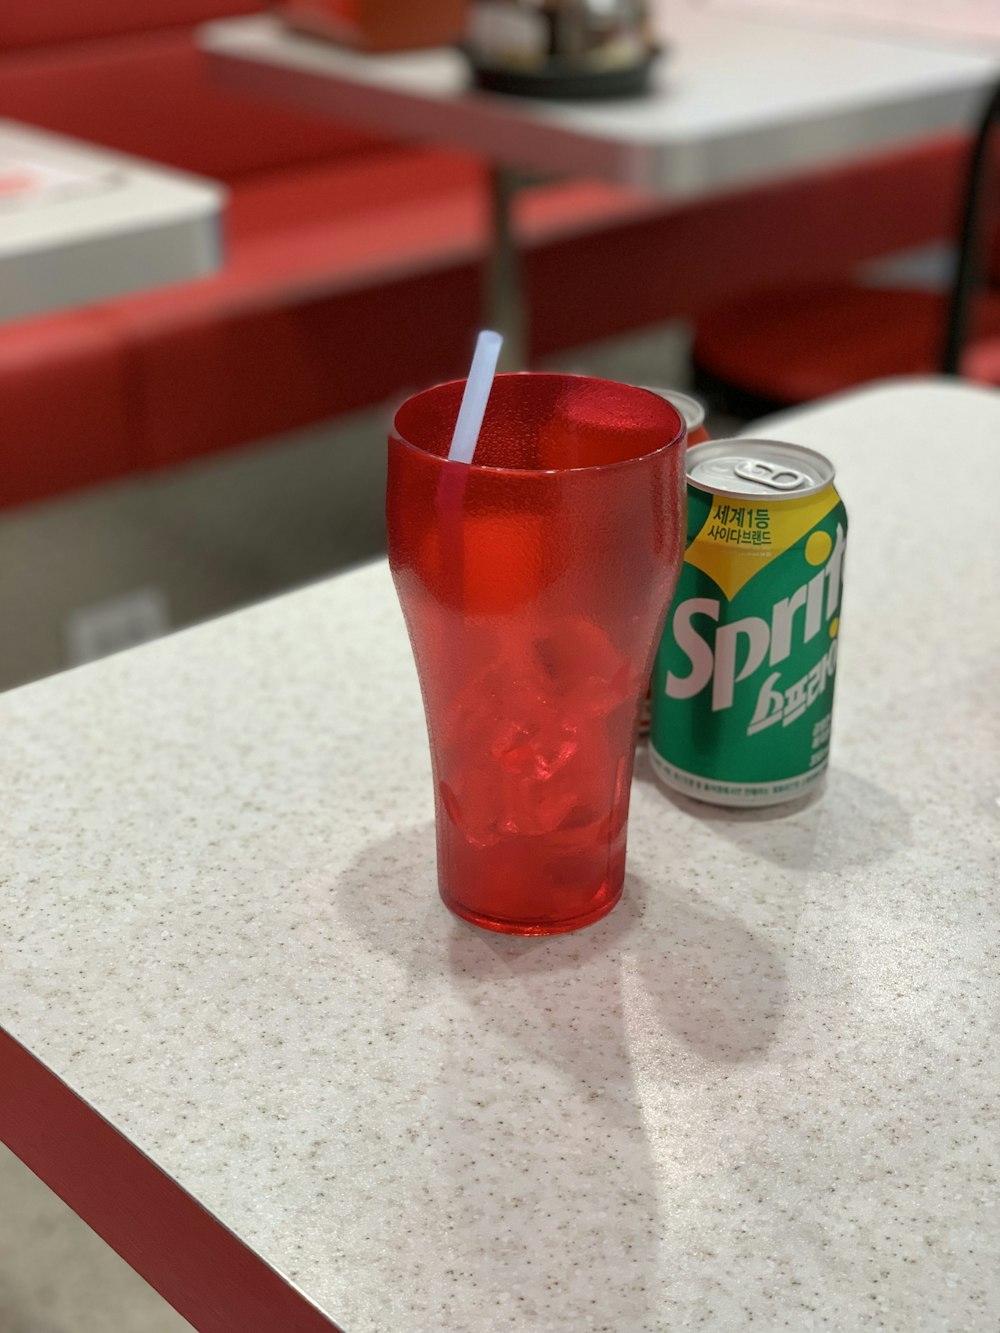 Sprite soda can beside red pint glass